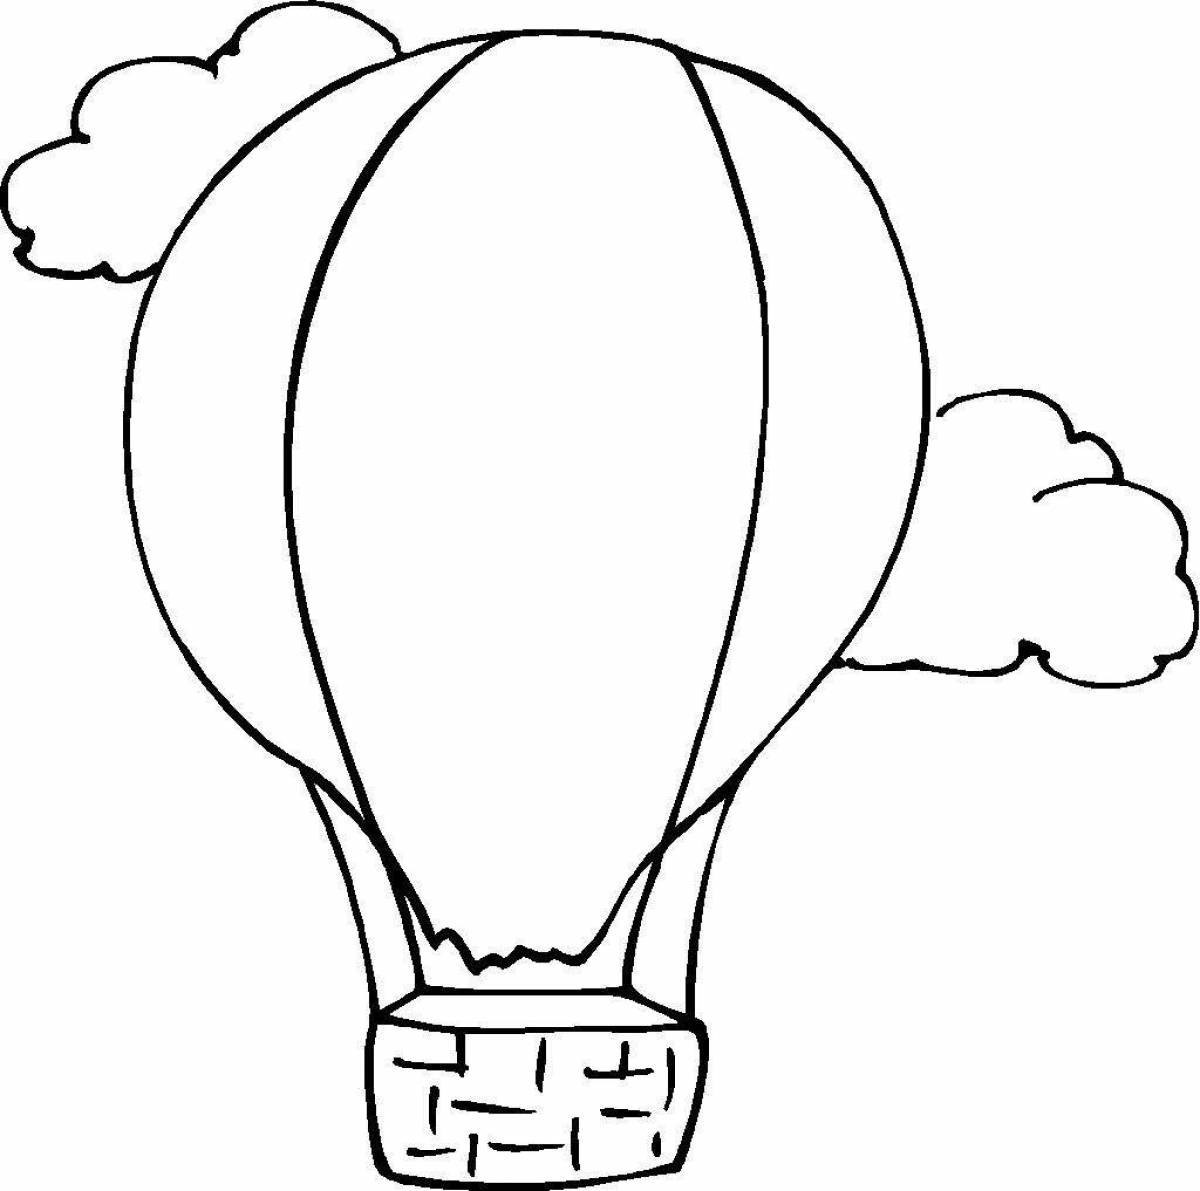 Amazing balloon coloring book for kids